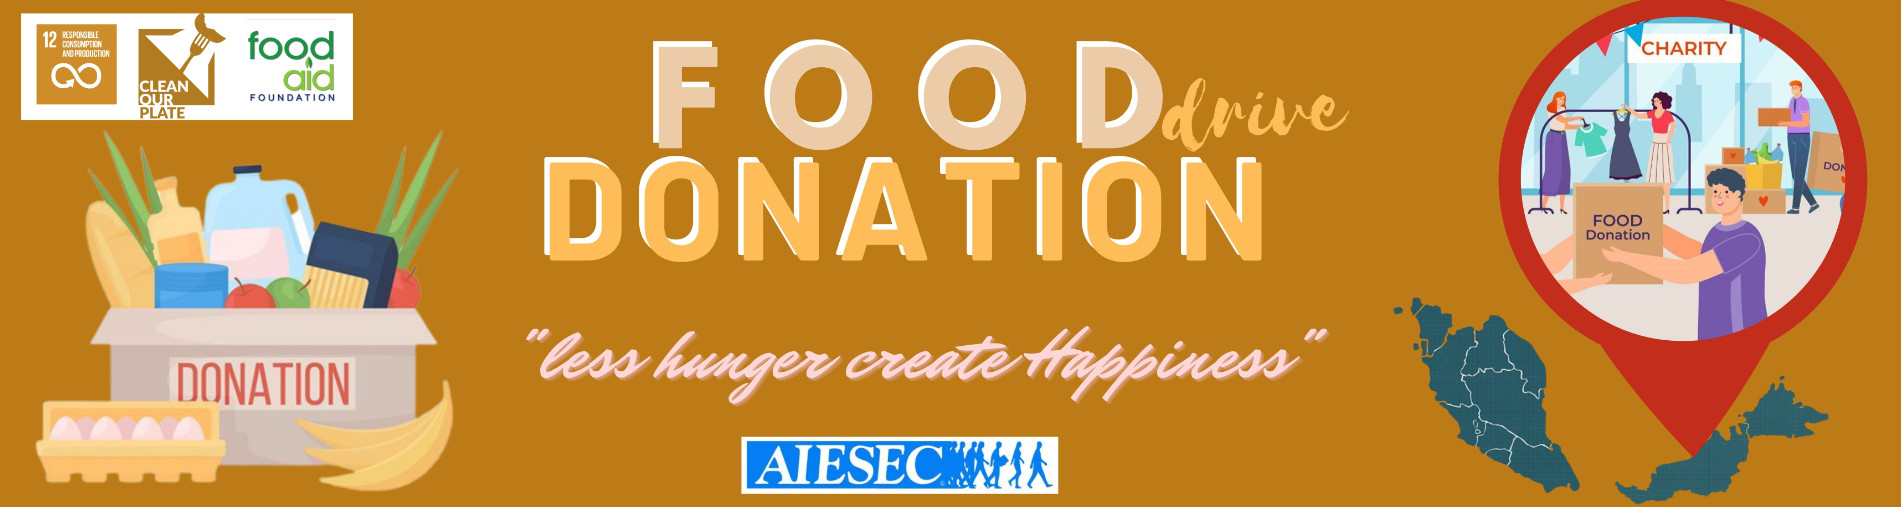 Food Donation Campaign